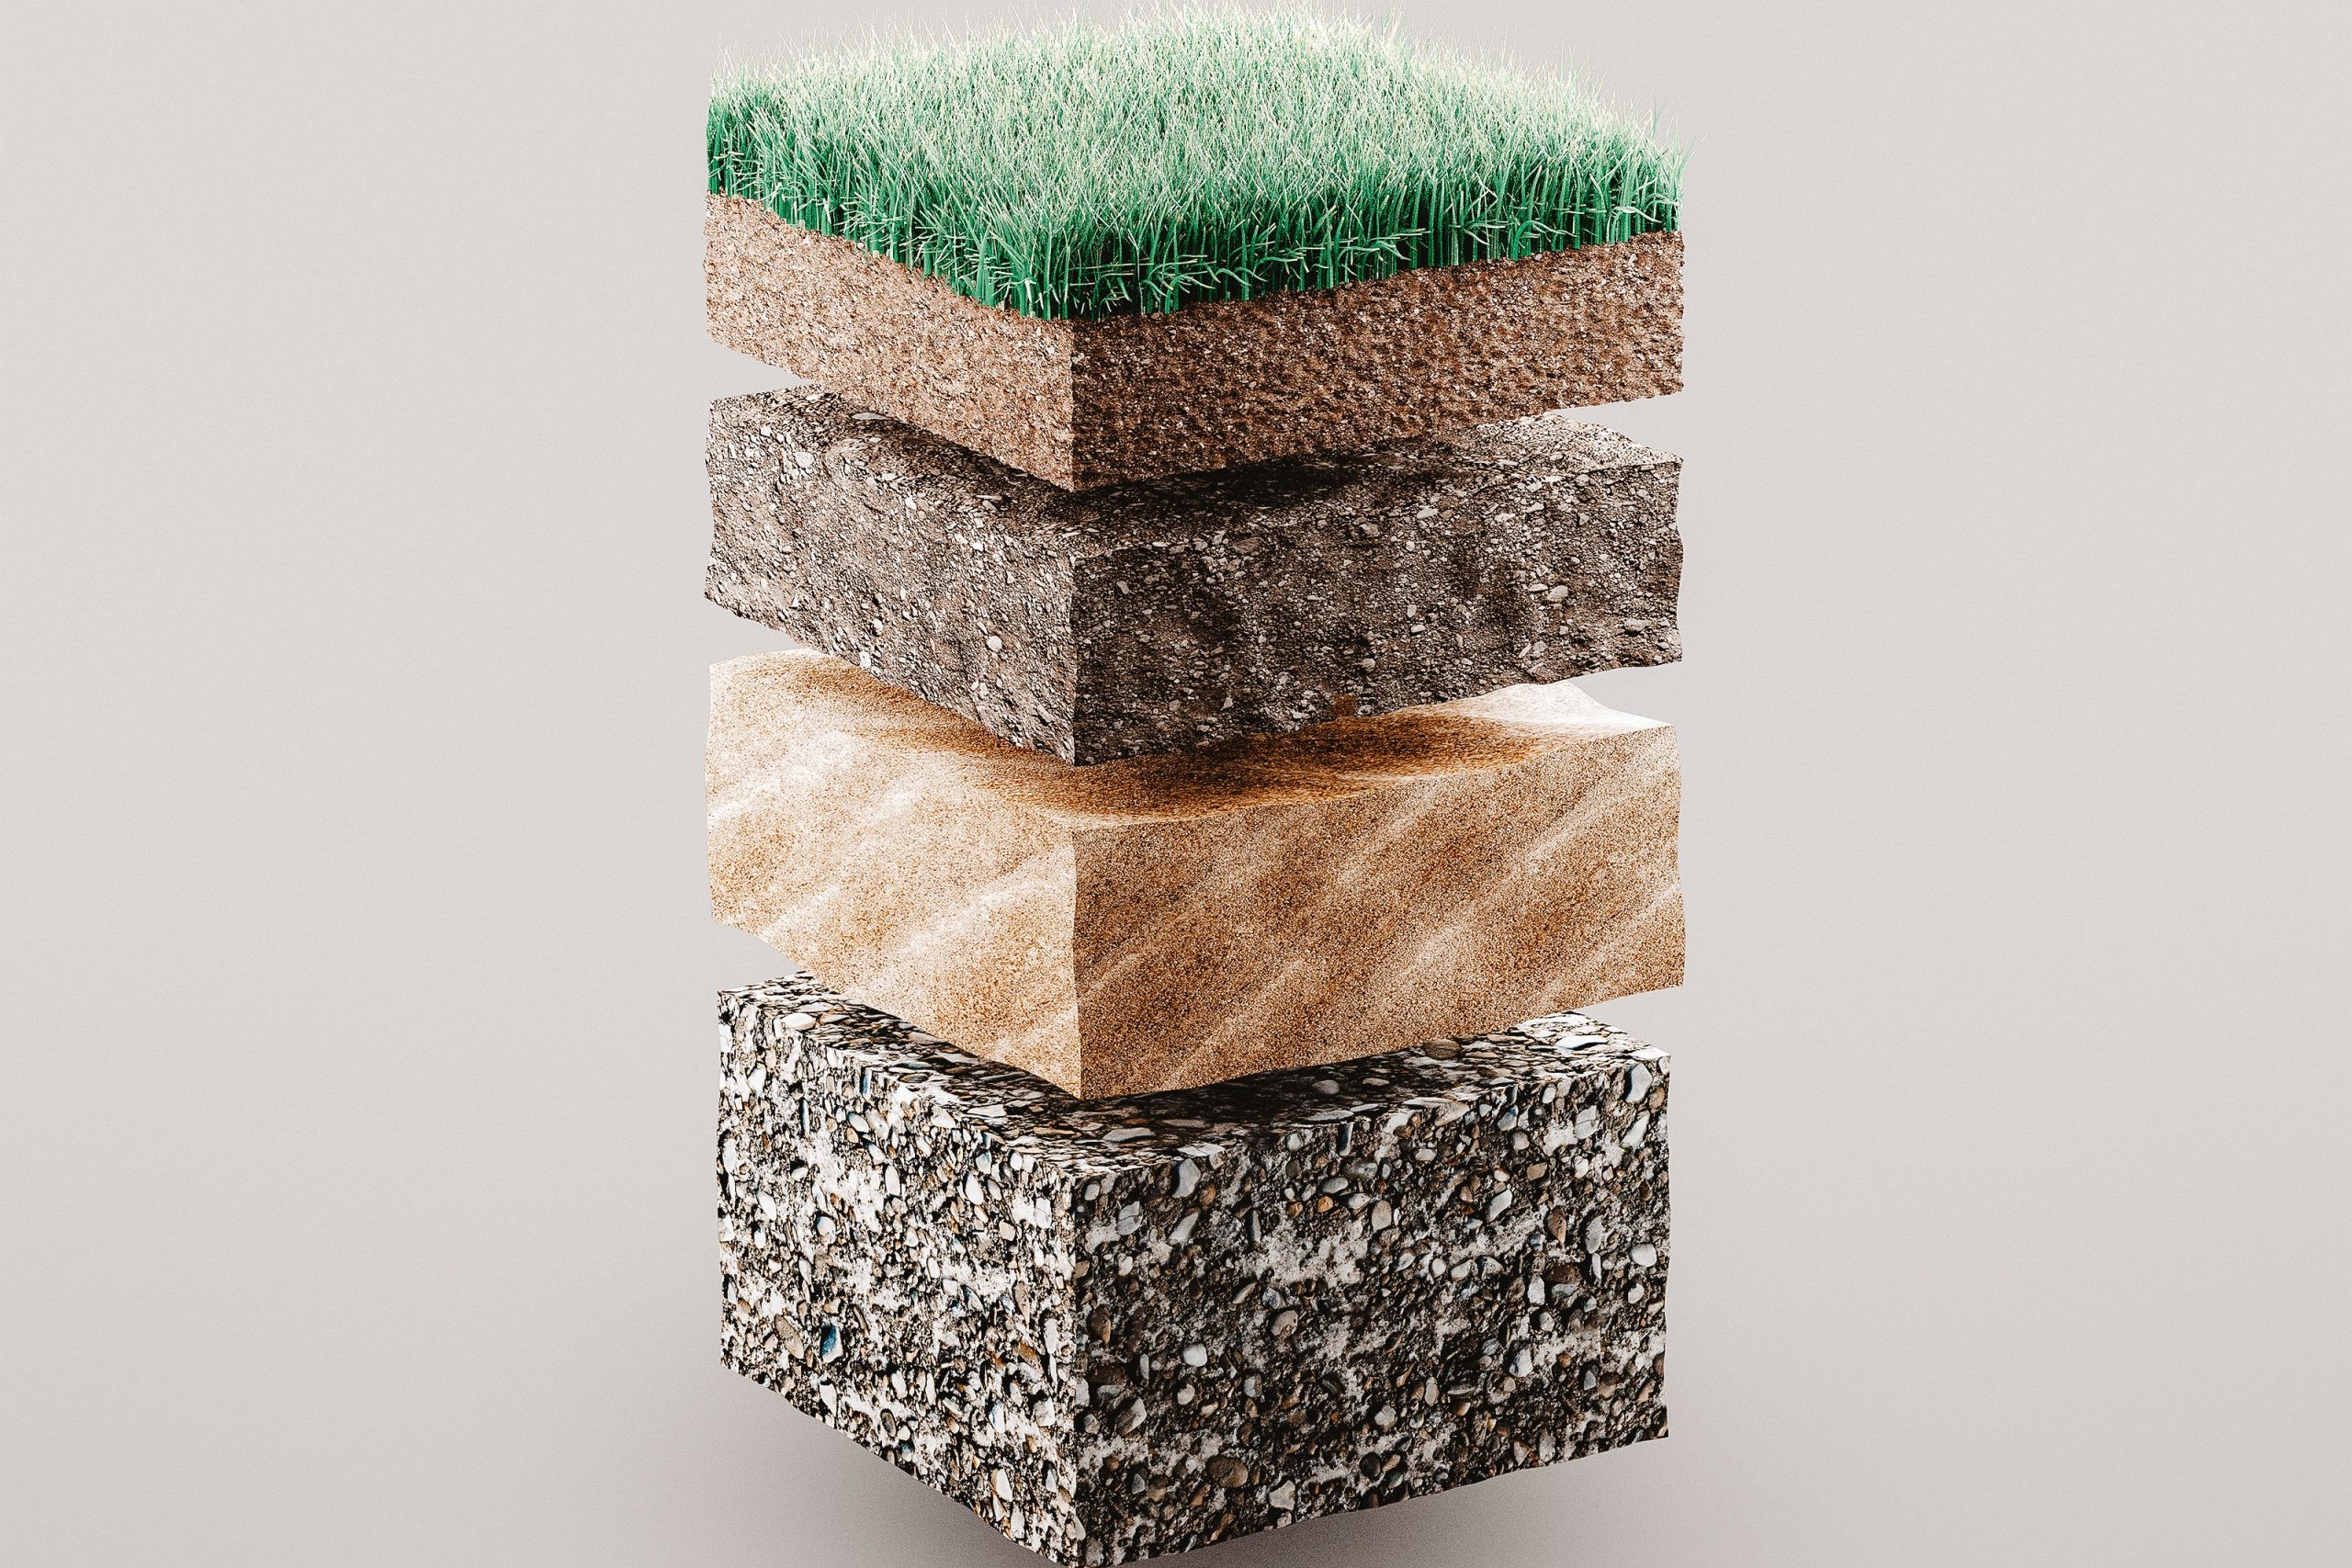 Layers of ground with grass, illustration concept